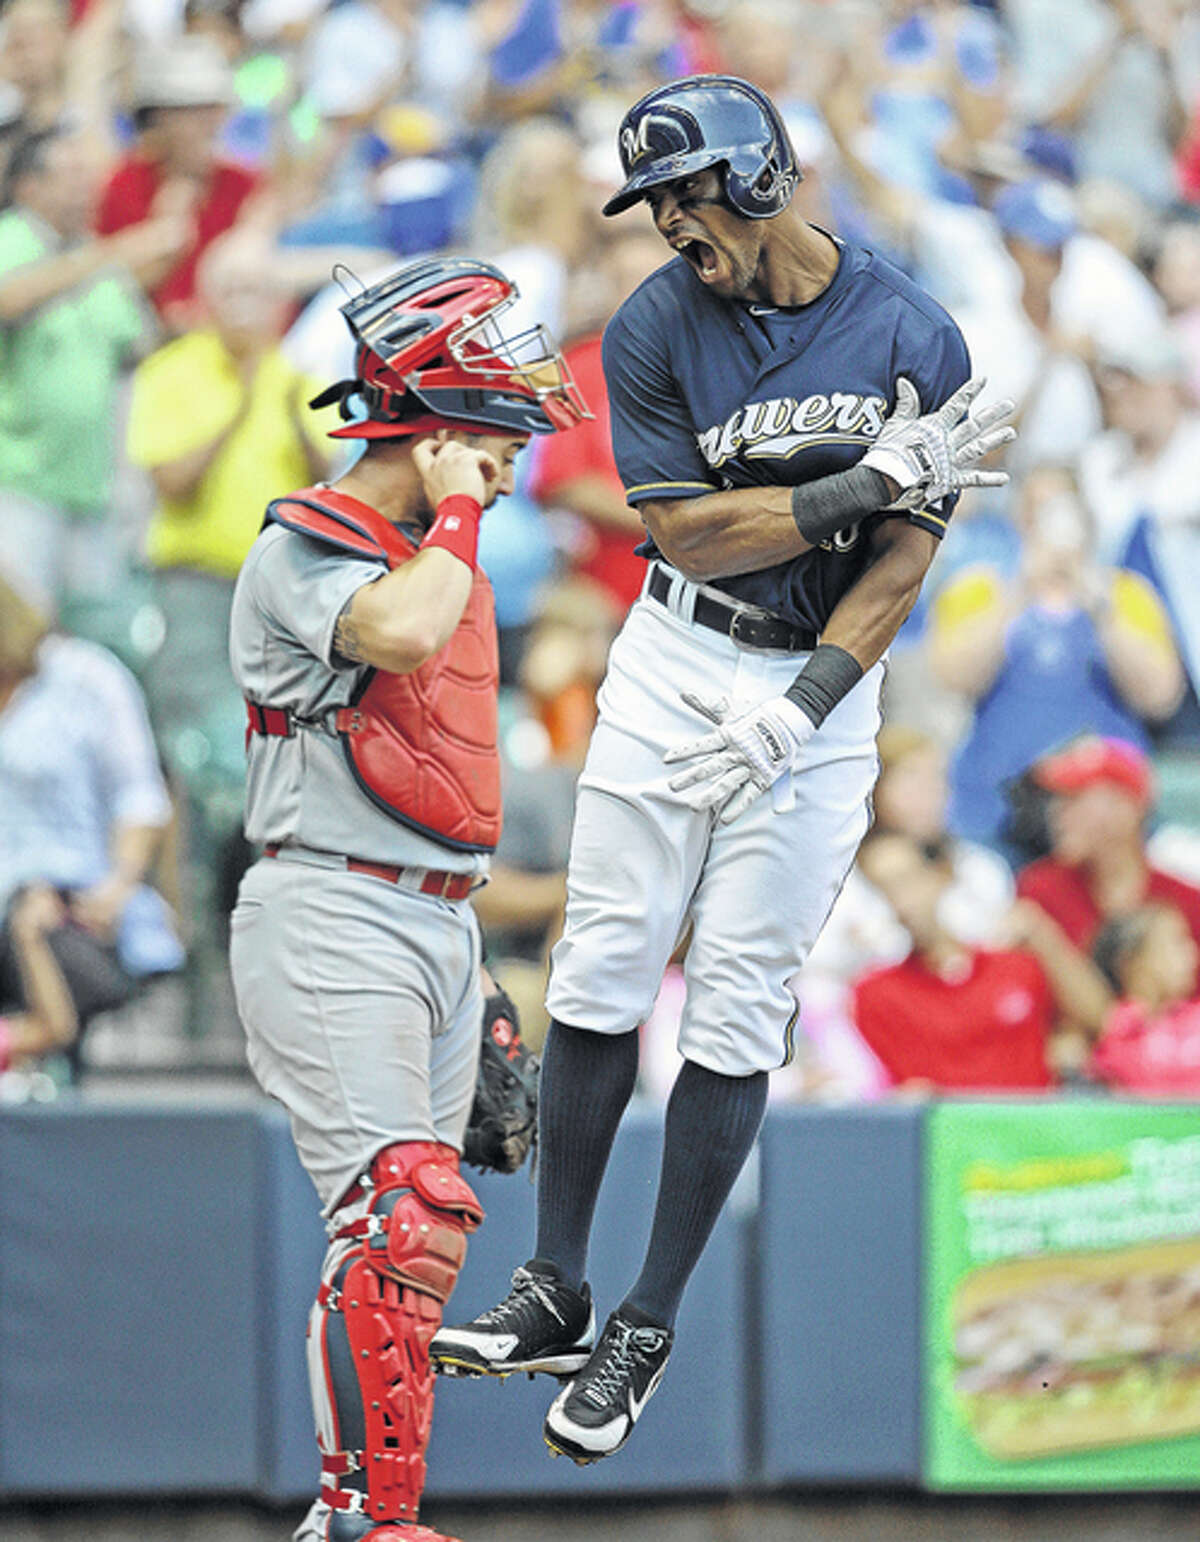 The Brewers’ Khris Davis (right) crosses the plate after his two-run home run while Cardinals catcher Tony Cruz looks on in the eighth inning Sunday in Milwaukee.